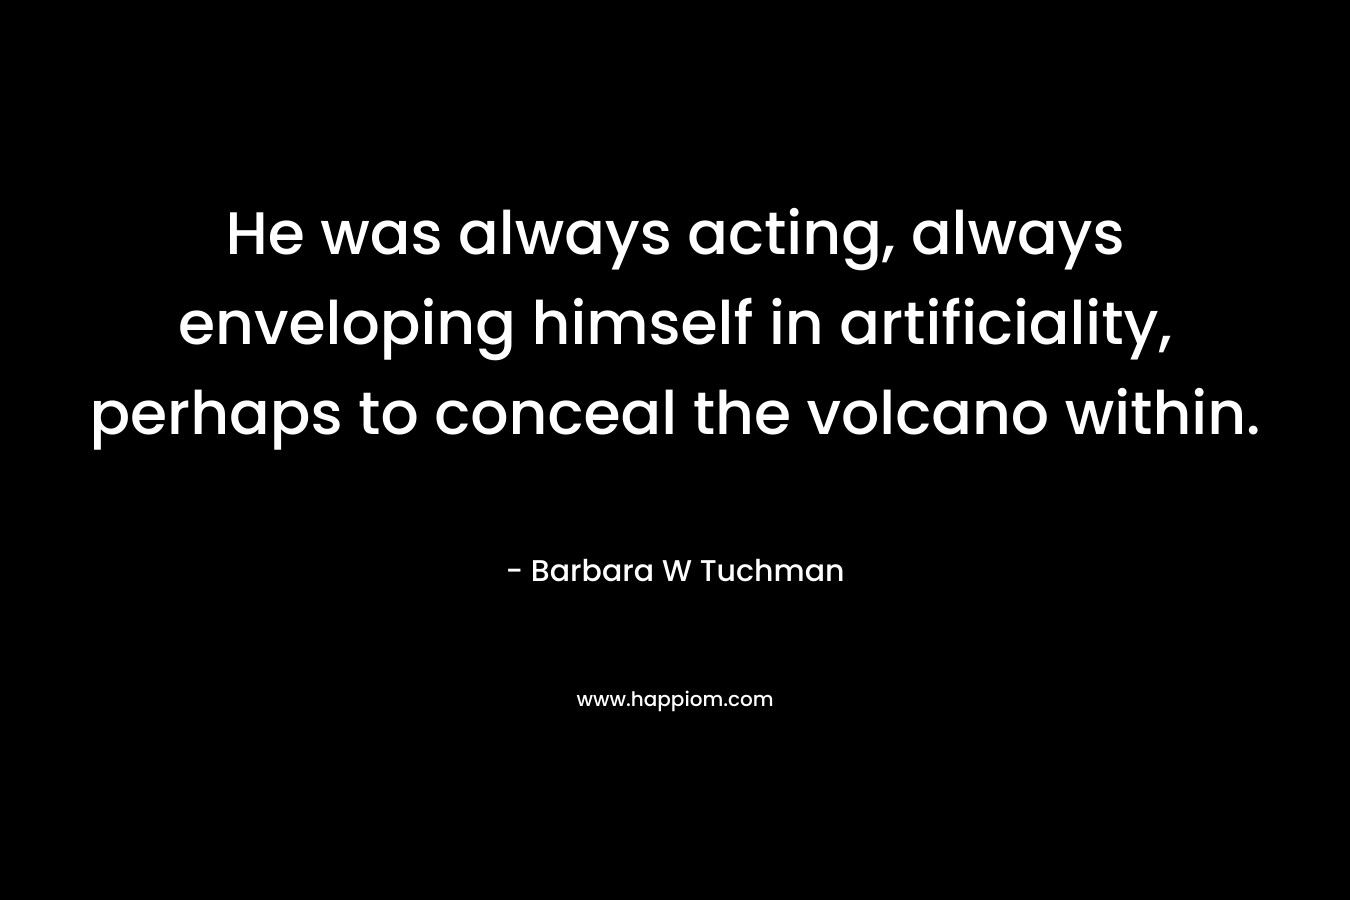 He was always acting, always enveloping himself in artificiality, perhaps to conceal the volcano within. – Barbara W Tuchman